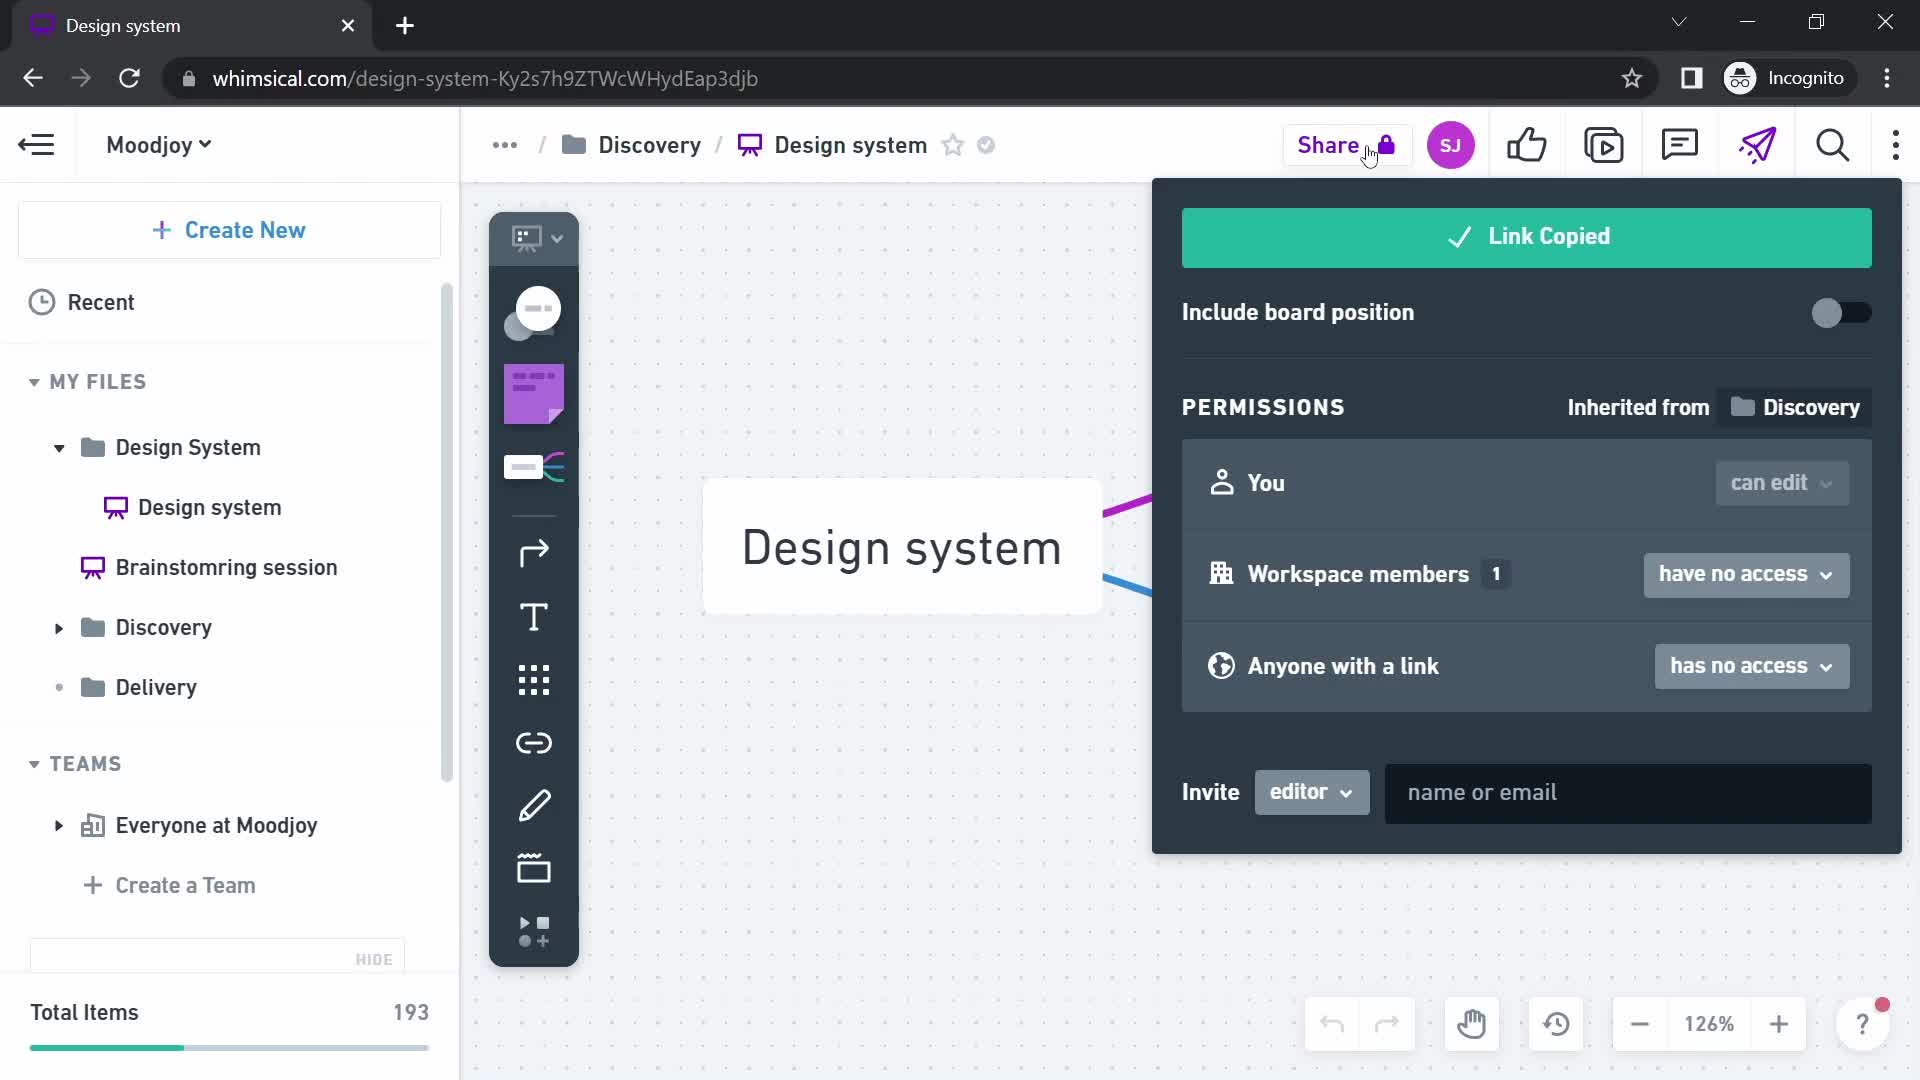 Screenshot of Share on Sharing on Whimsical user flow